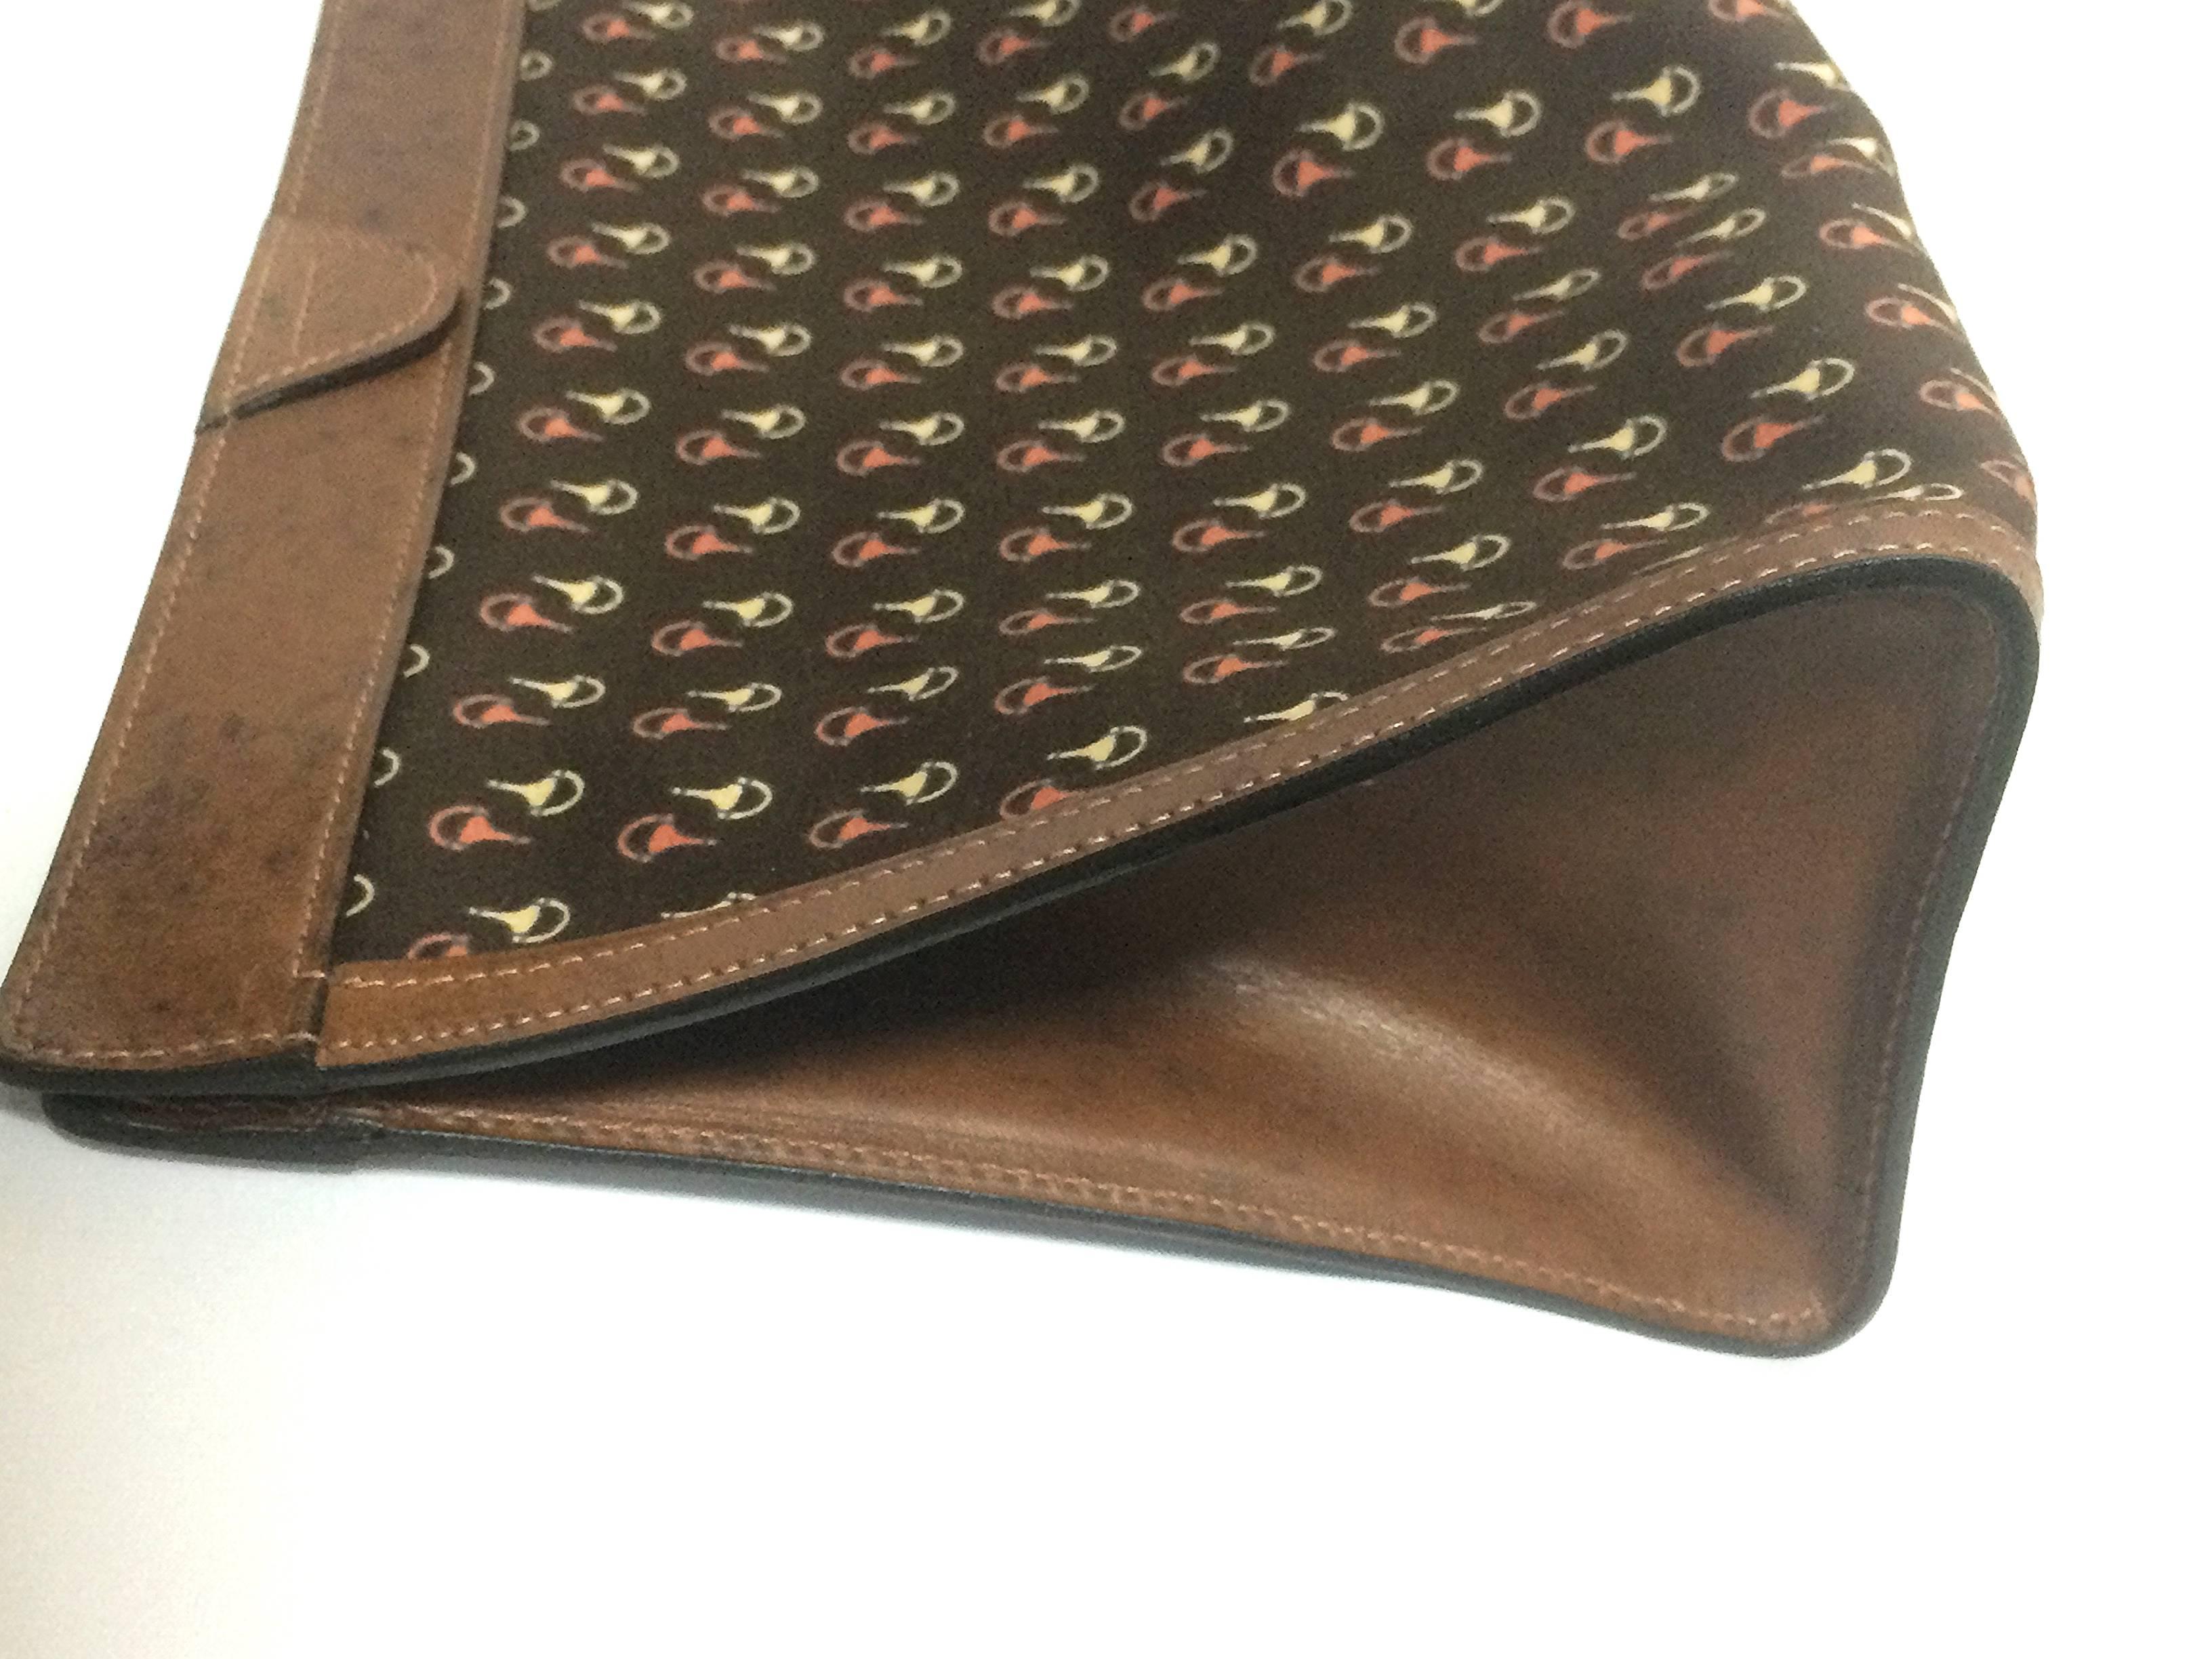 Vintage Gucci brown toiletry clutch pouch with all over horsebit print 1